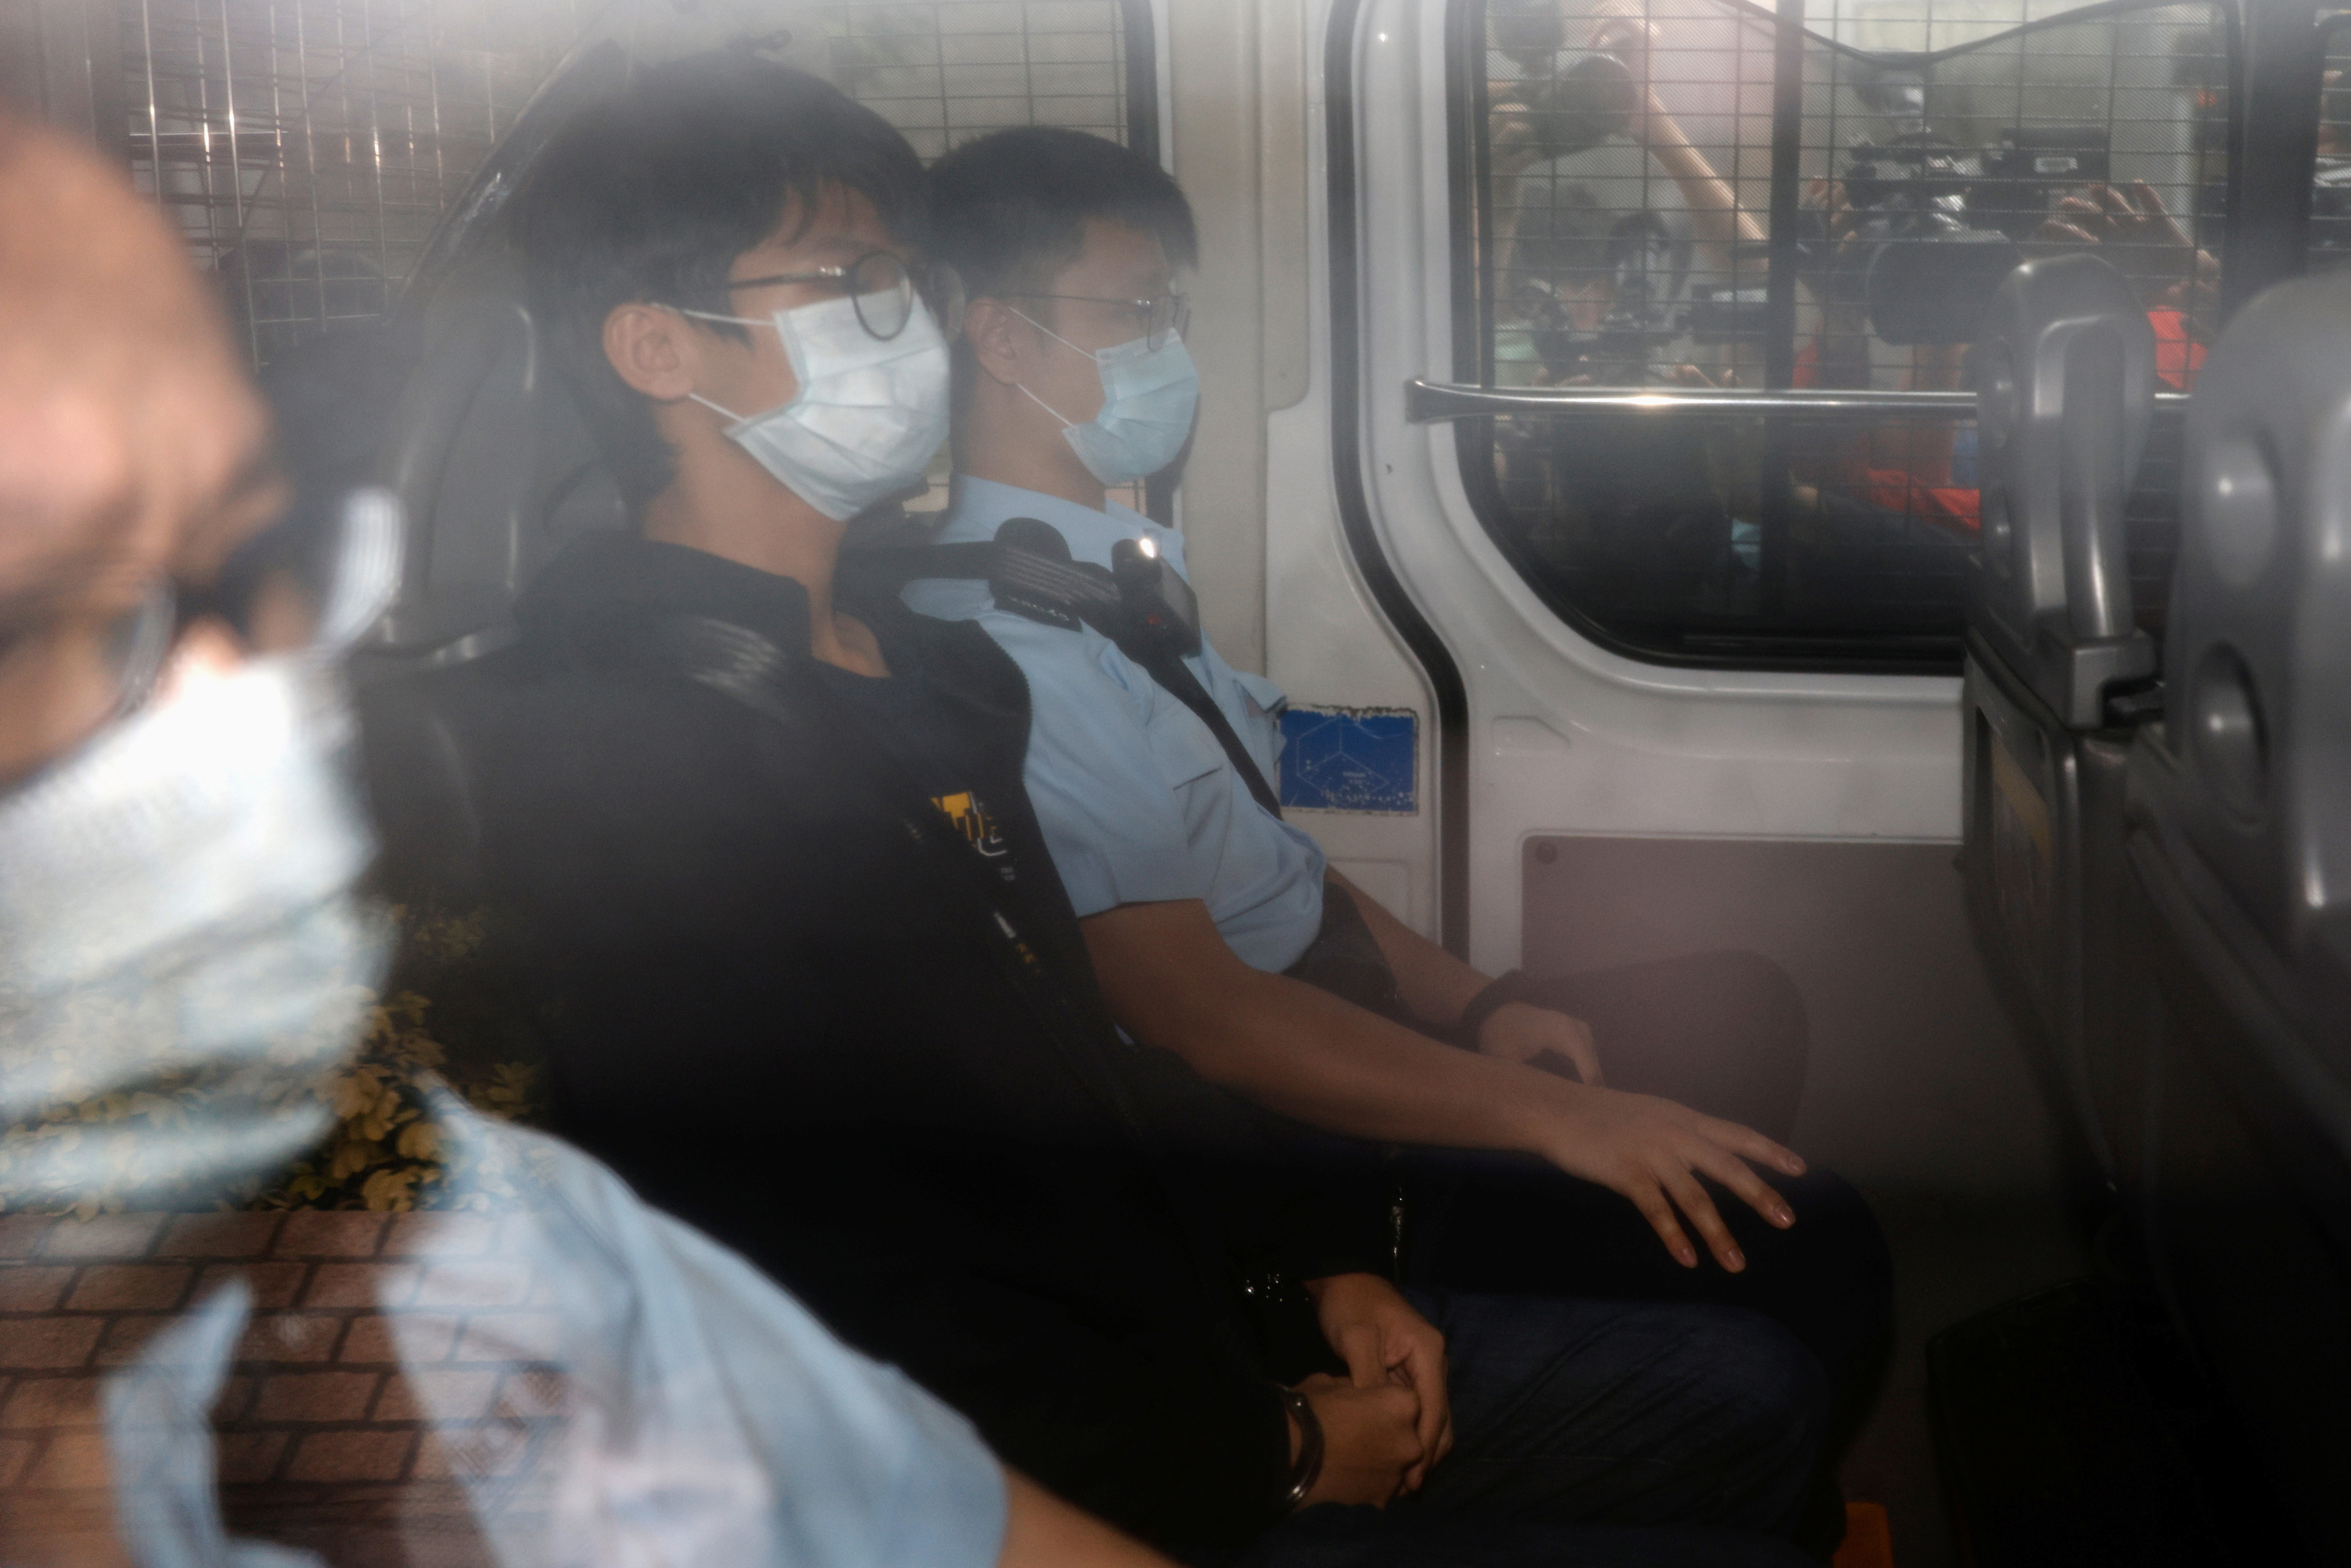 Former convenor of pro-independence group Studentlocalism, Tony Chung Hon-lam arrives at West Kowloon Magistrates‘ Courts in a police van after he was arrested under the national security law, in Hong Kong, China October 15, 2020. REUTERS/Tyrone Siu